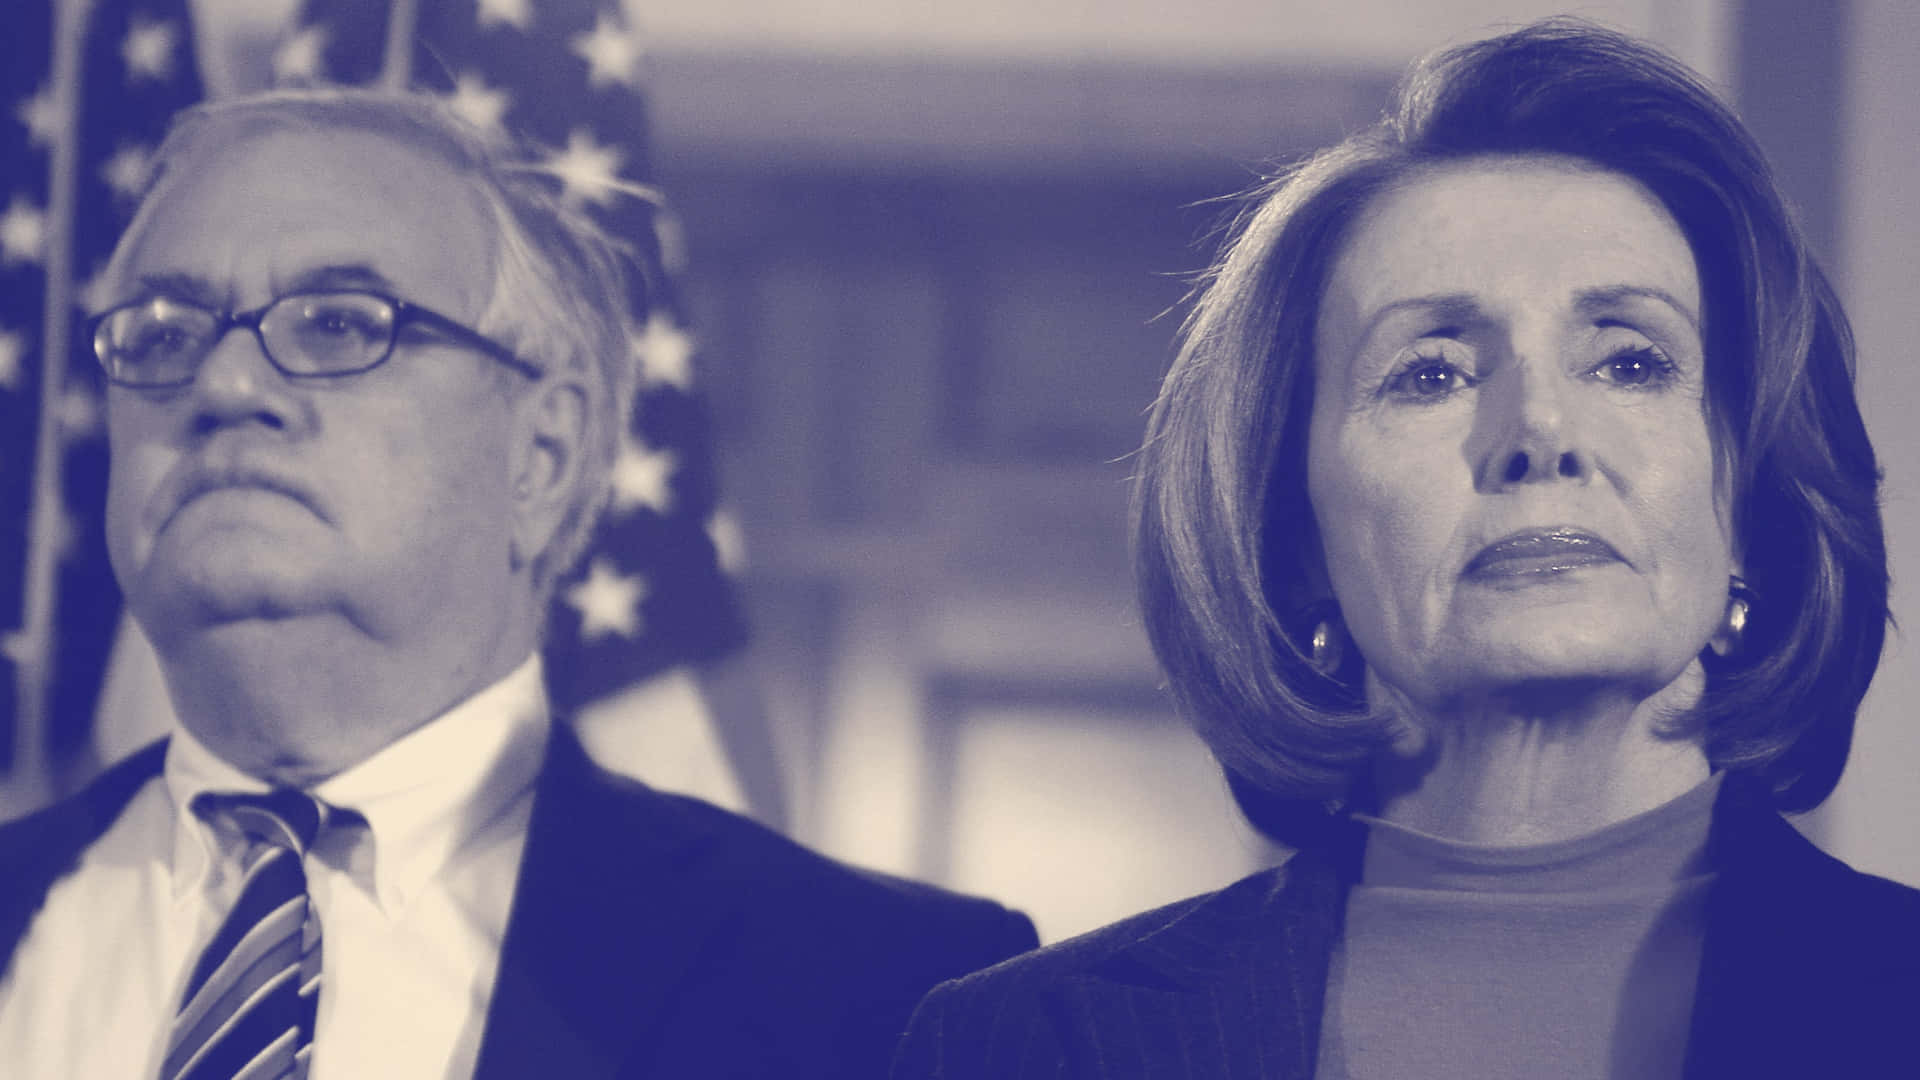 Barney Frank and Nancy Pelosi in Blue Filter Discussion Wallpaper